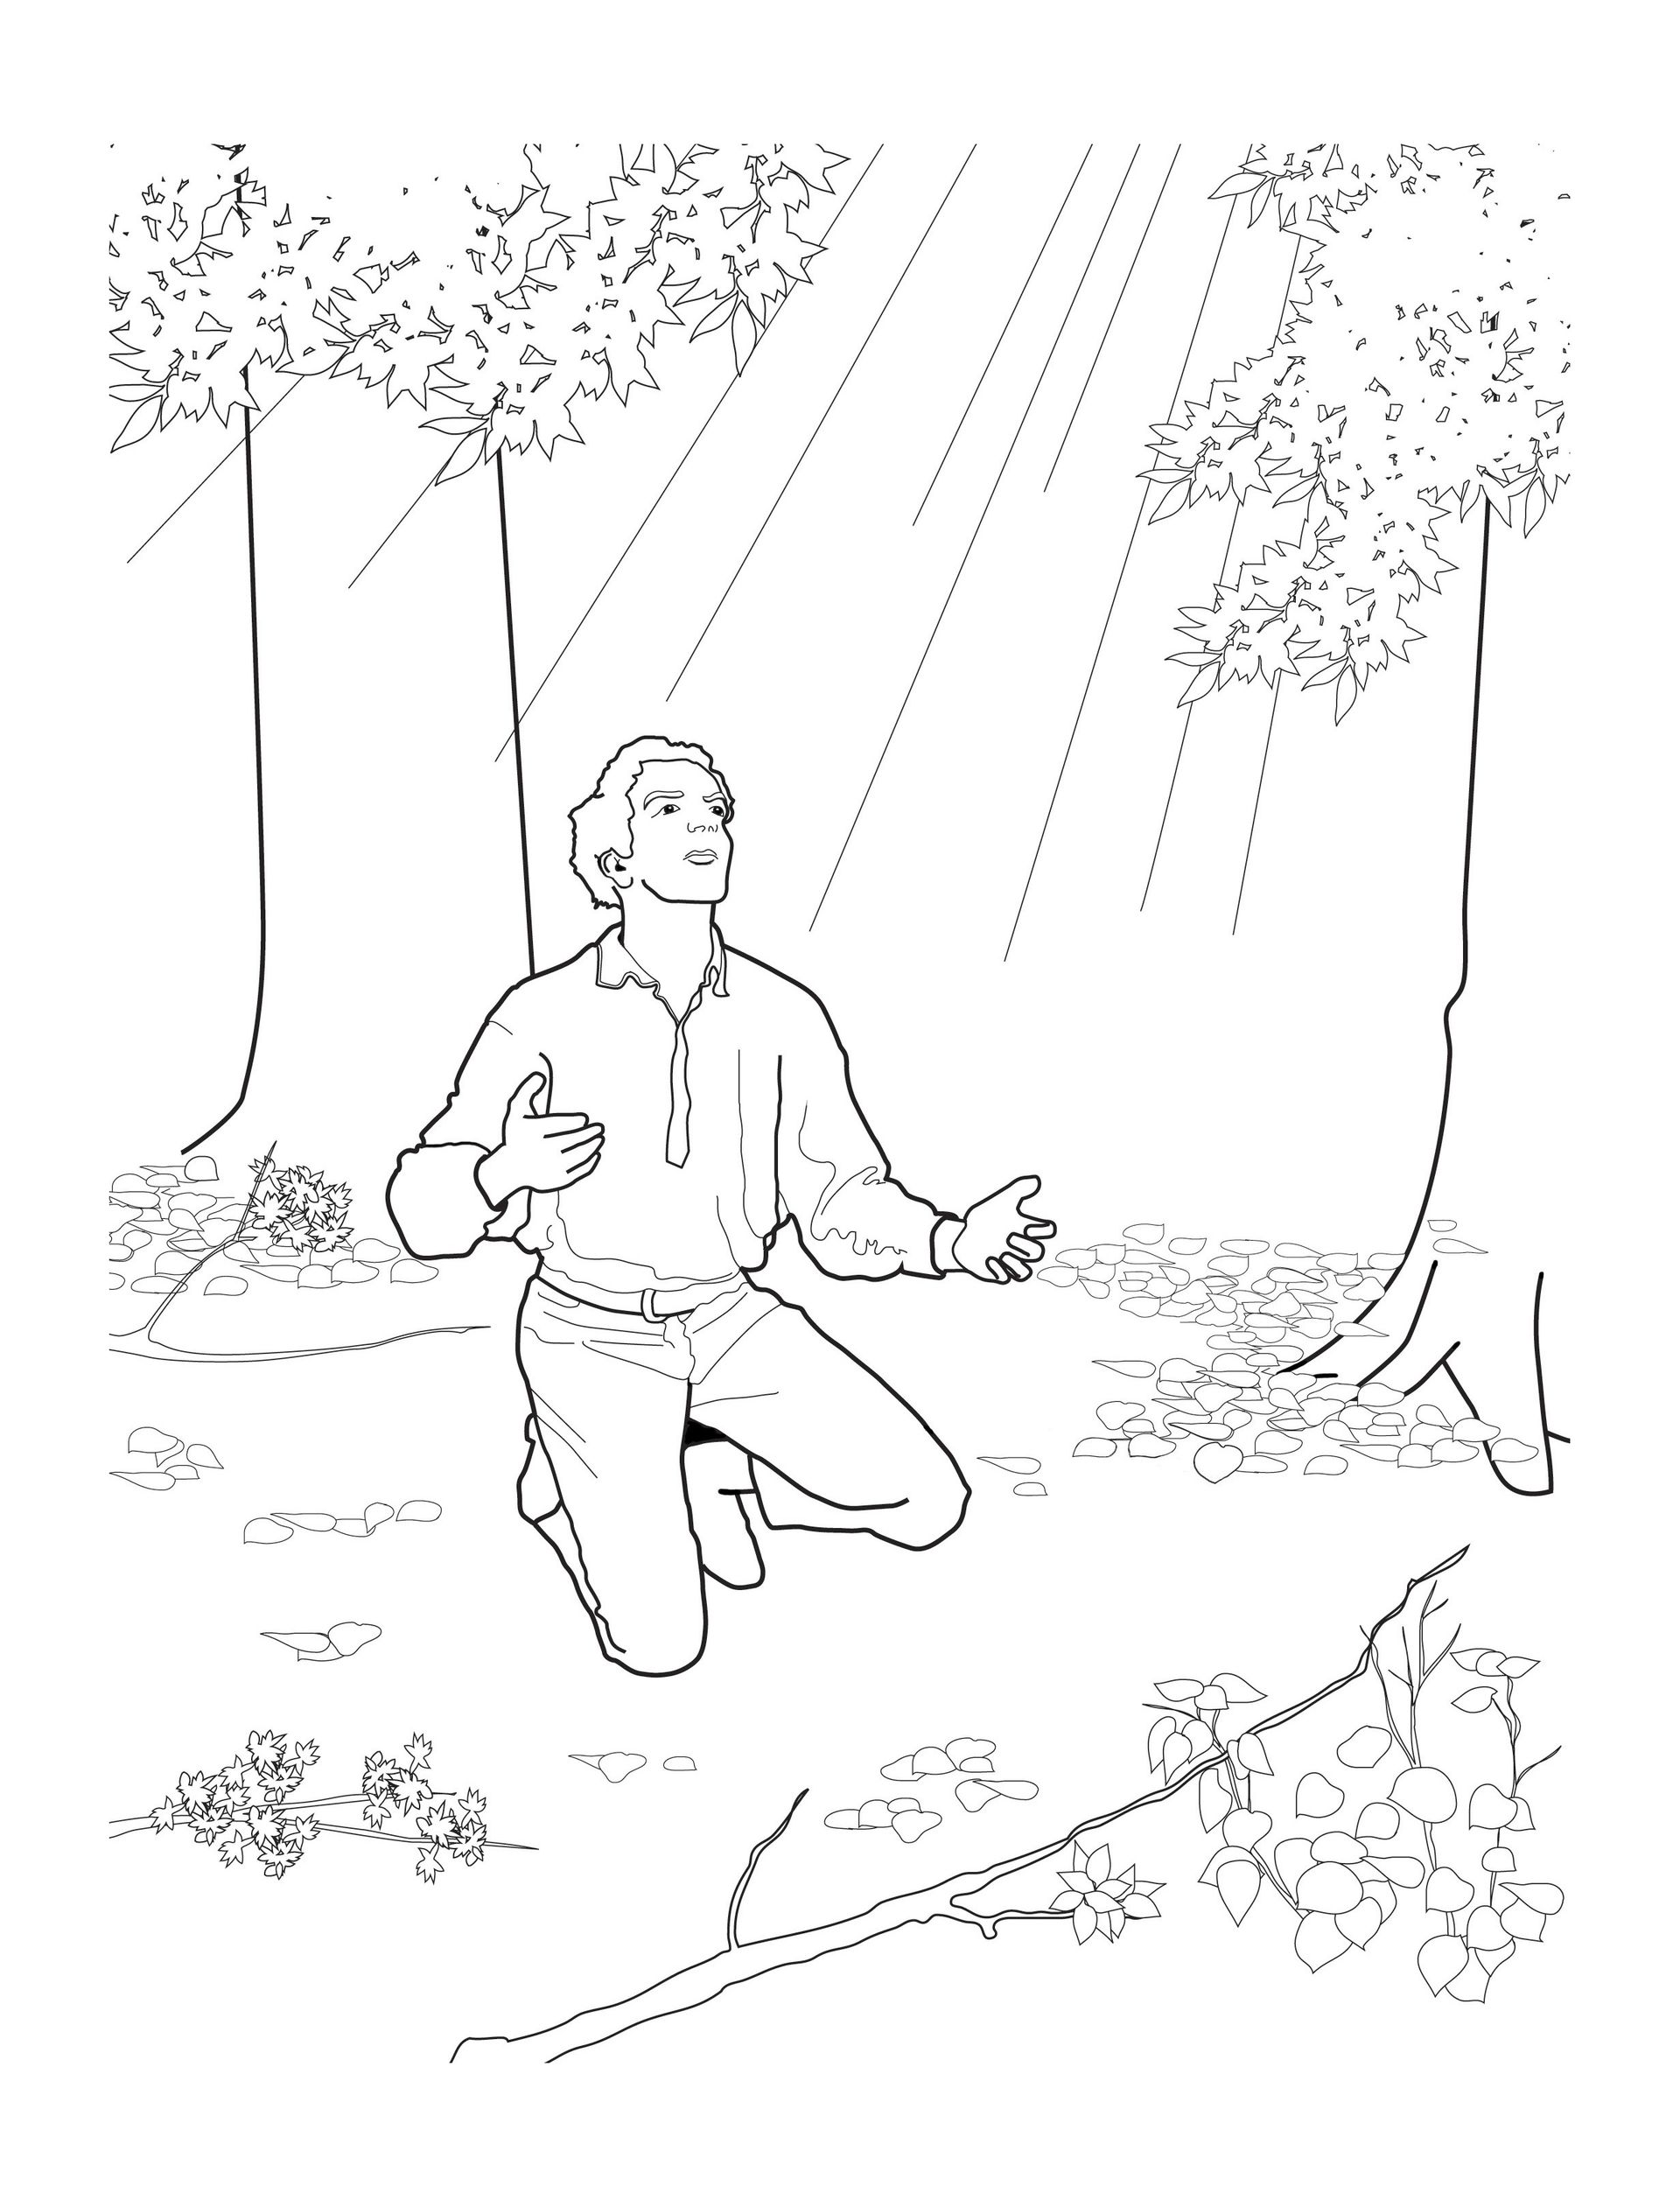 Joseph Smith kneels and prays in a grove of trees.